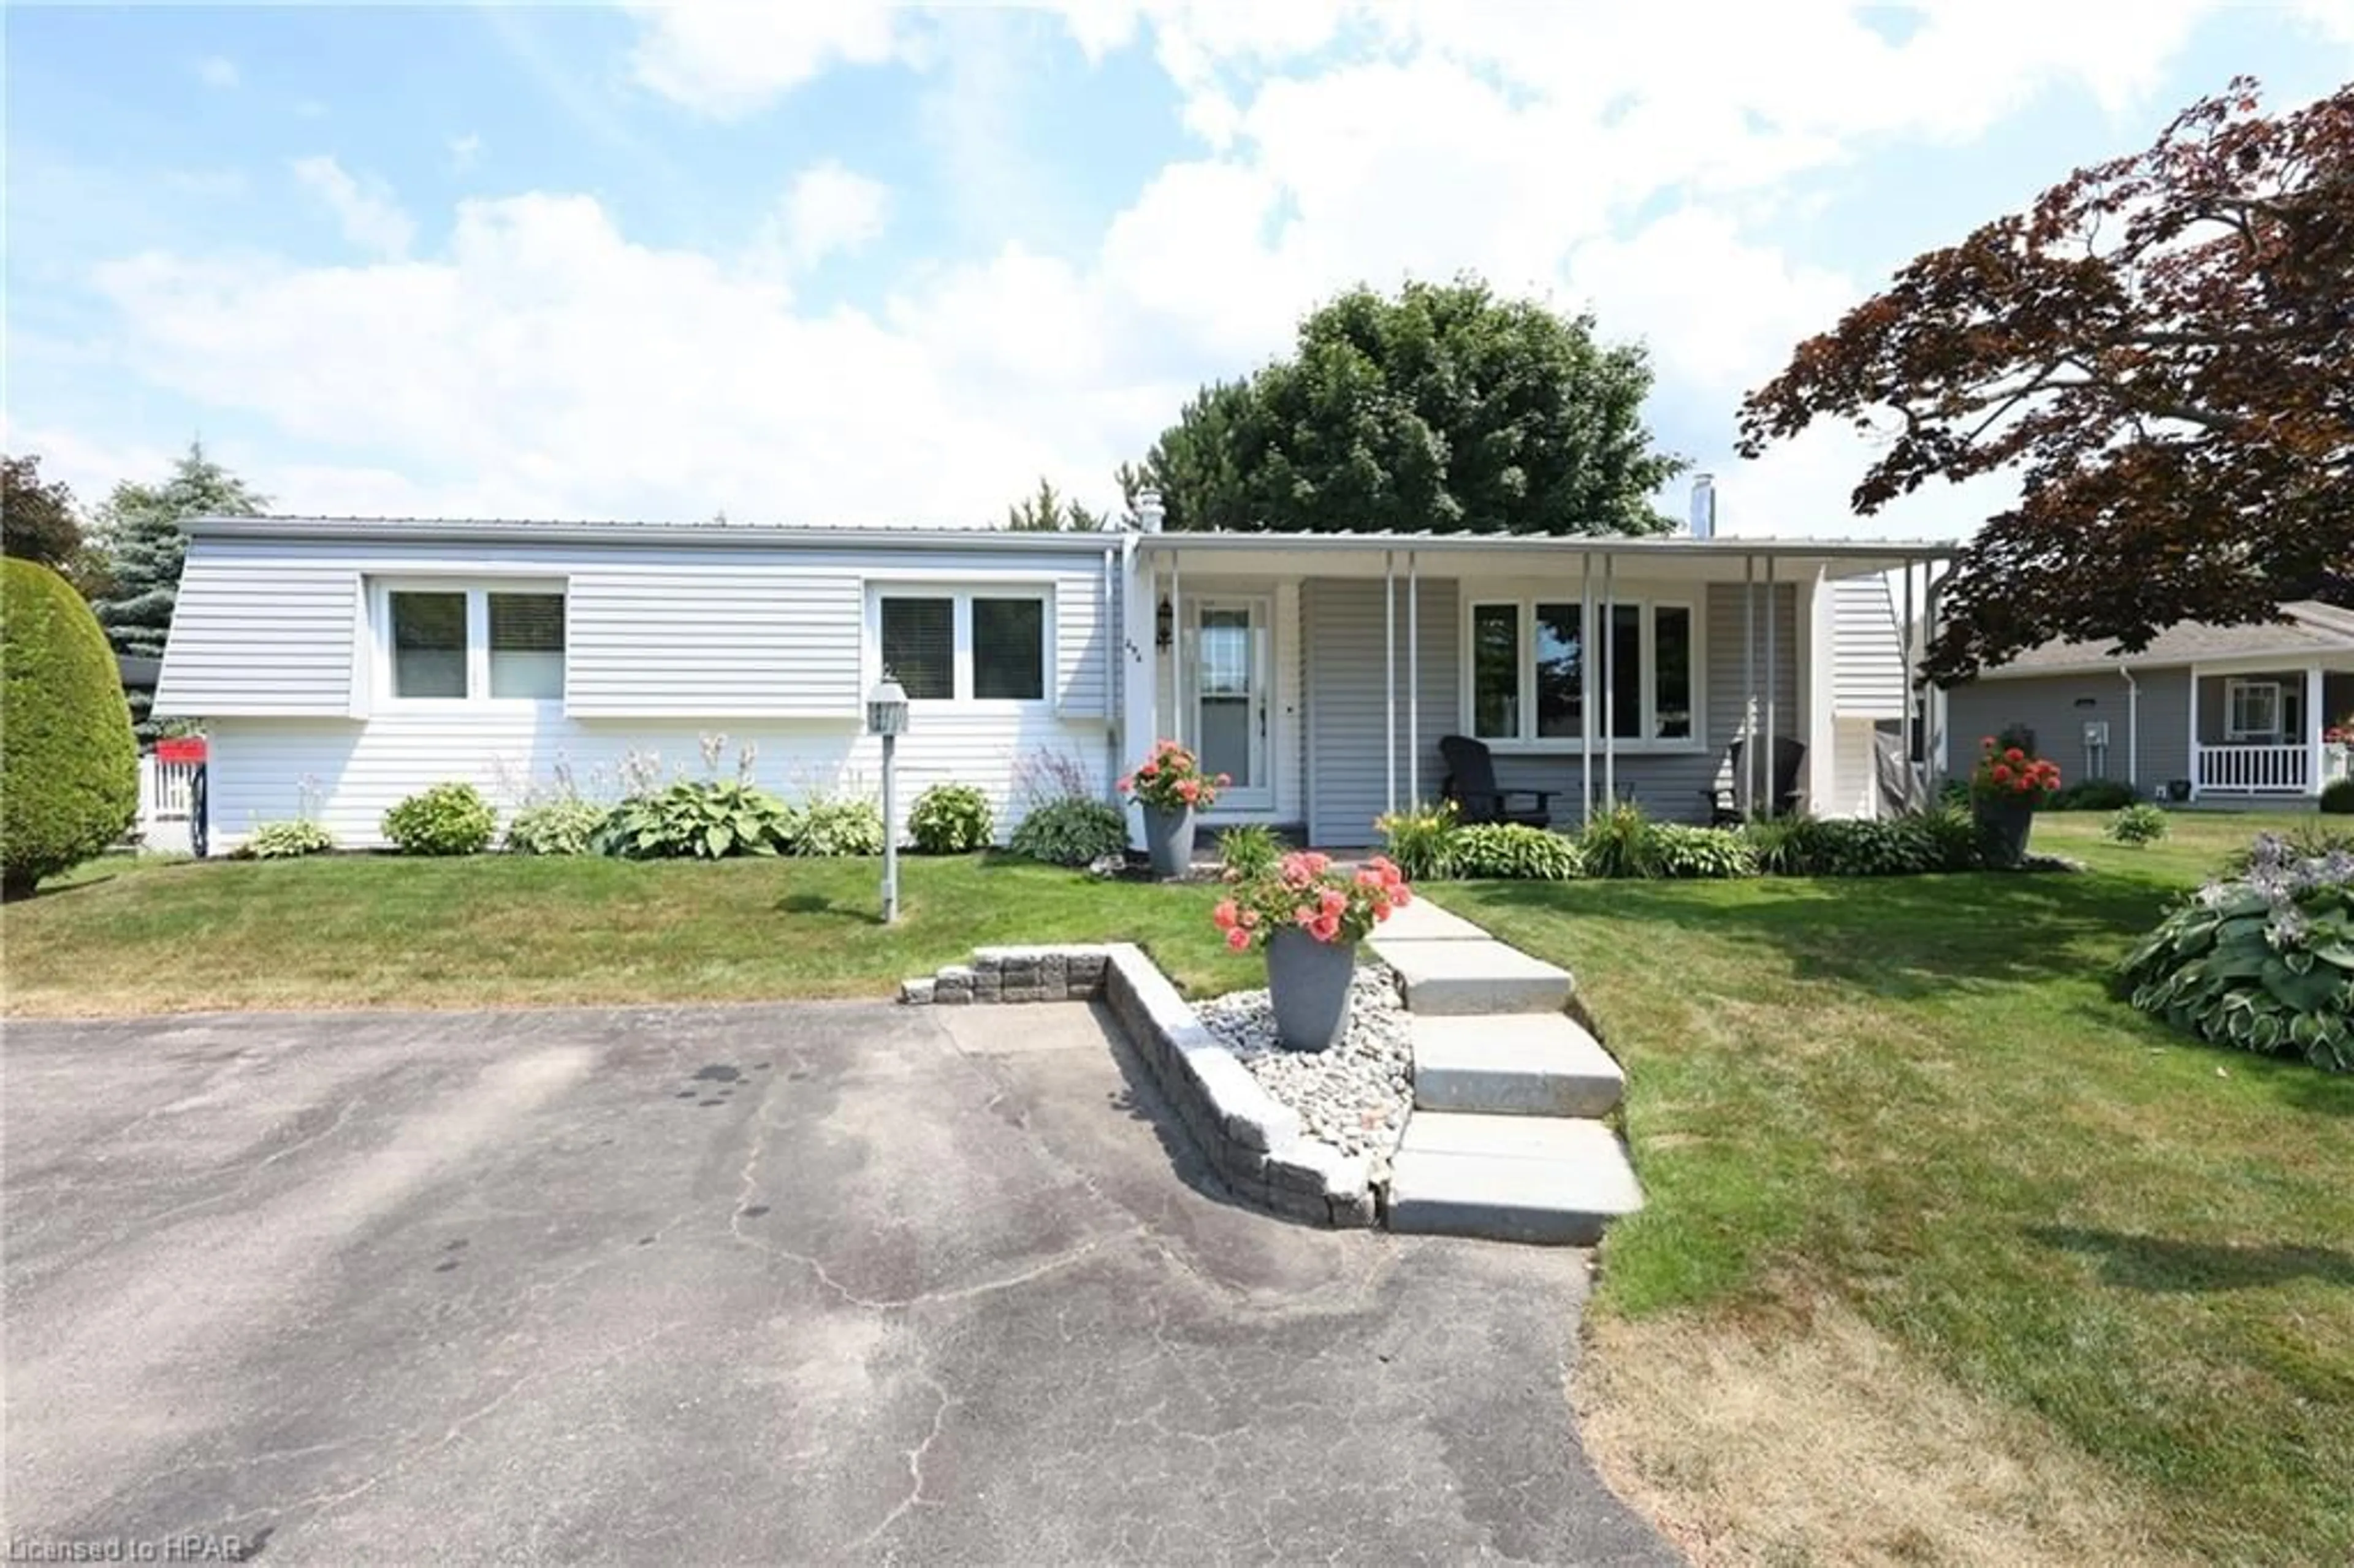 Frontside or backside of a home for 296 Pebble Beach Pky, Grand Bend Ontario N0M 1T0